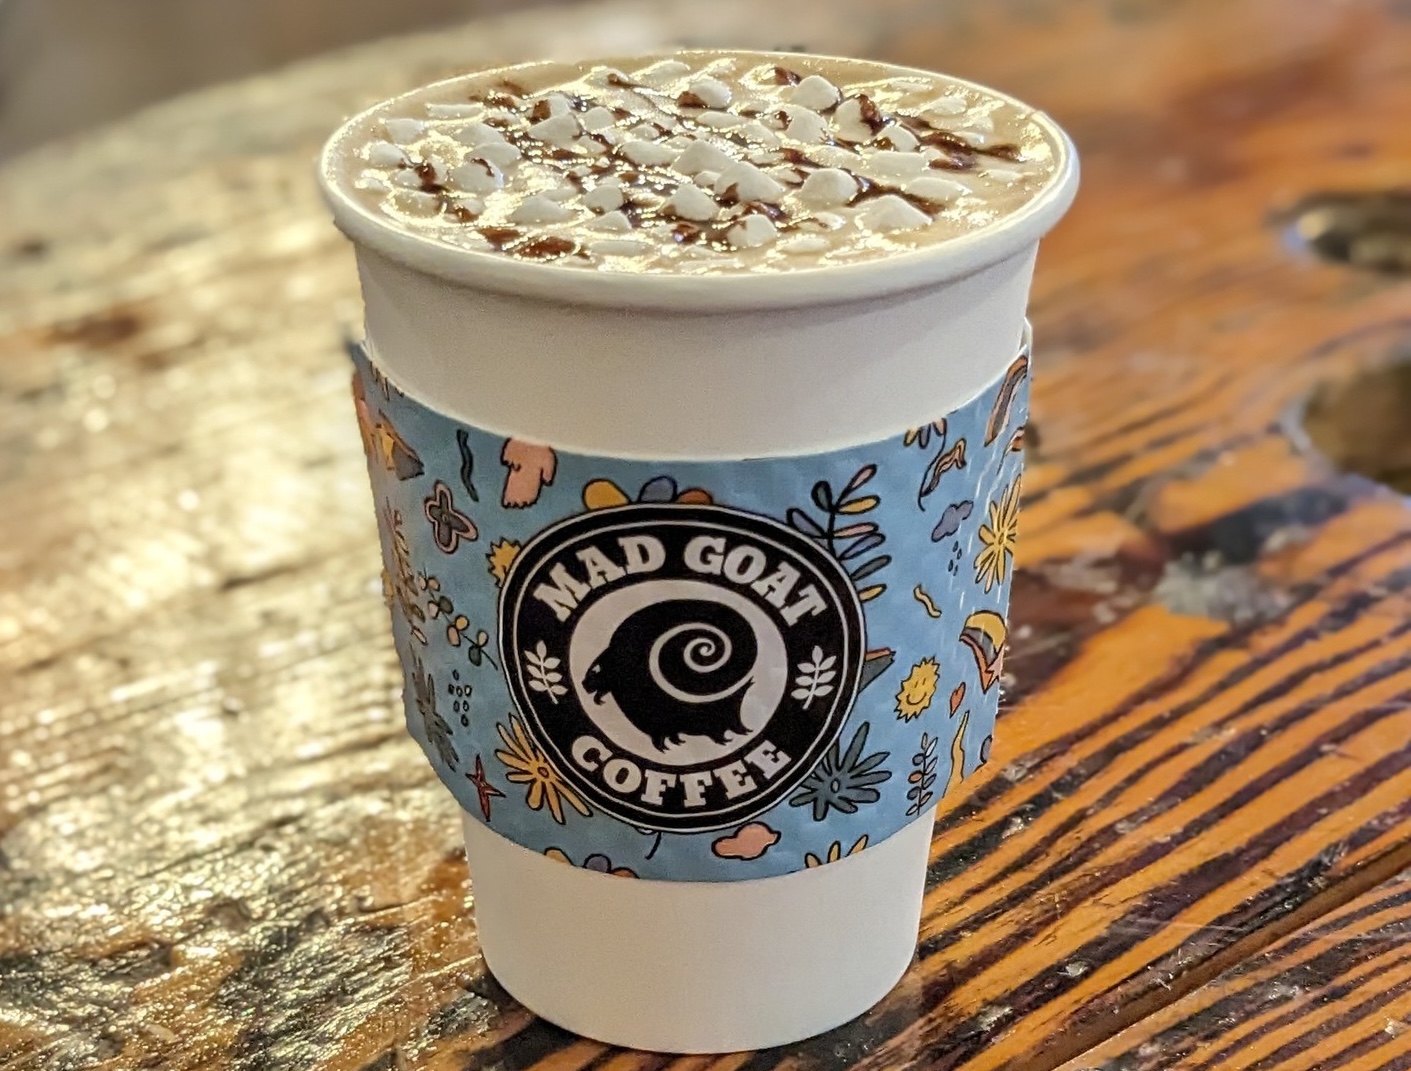 A white paper cup with a s'mores latte. There is a blue coffee cup holder with the Mad Goat Coffee logo on it.